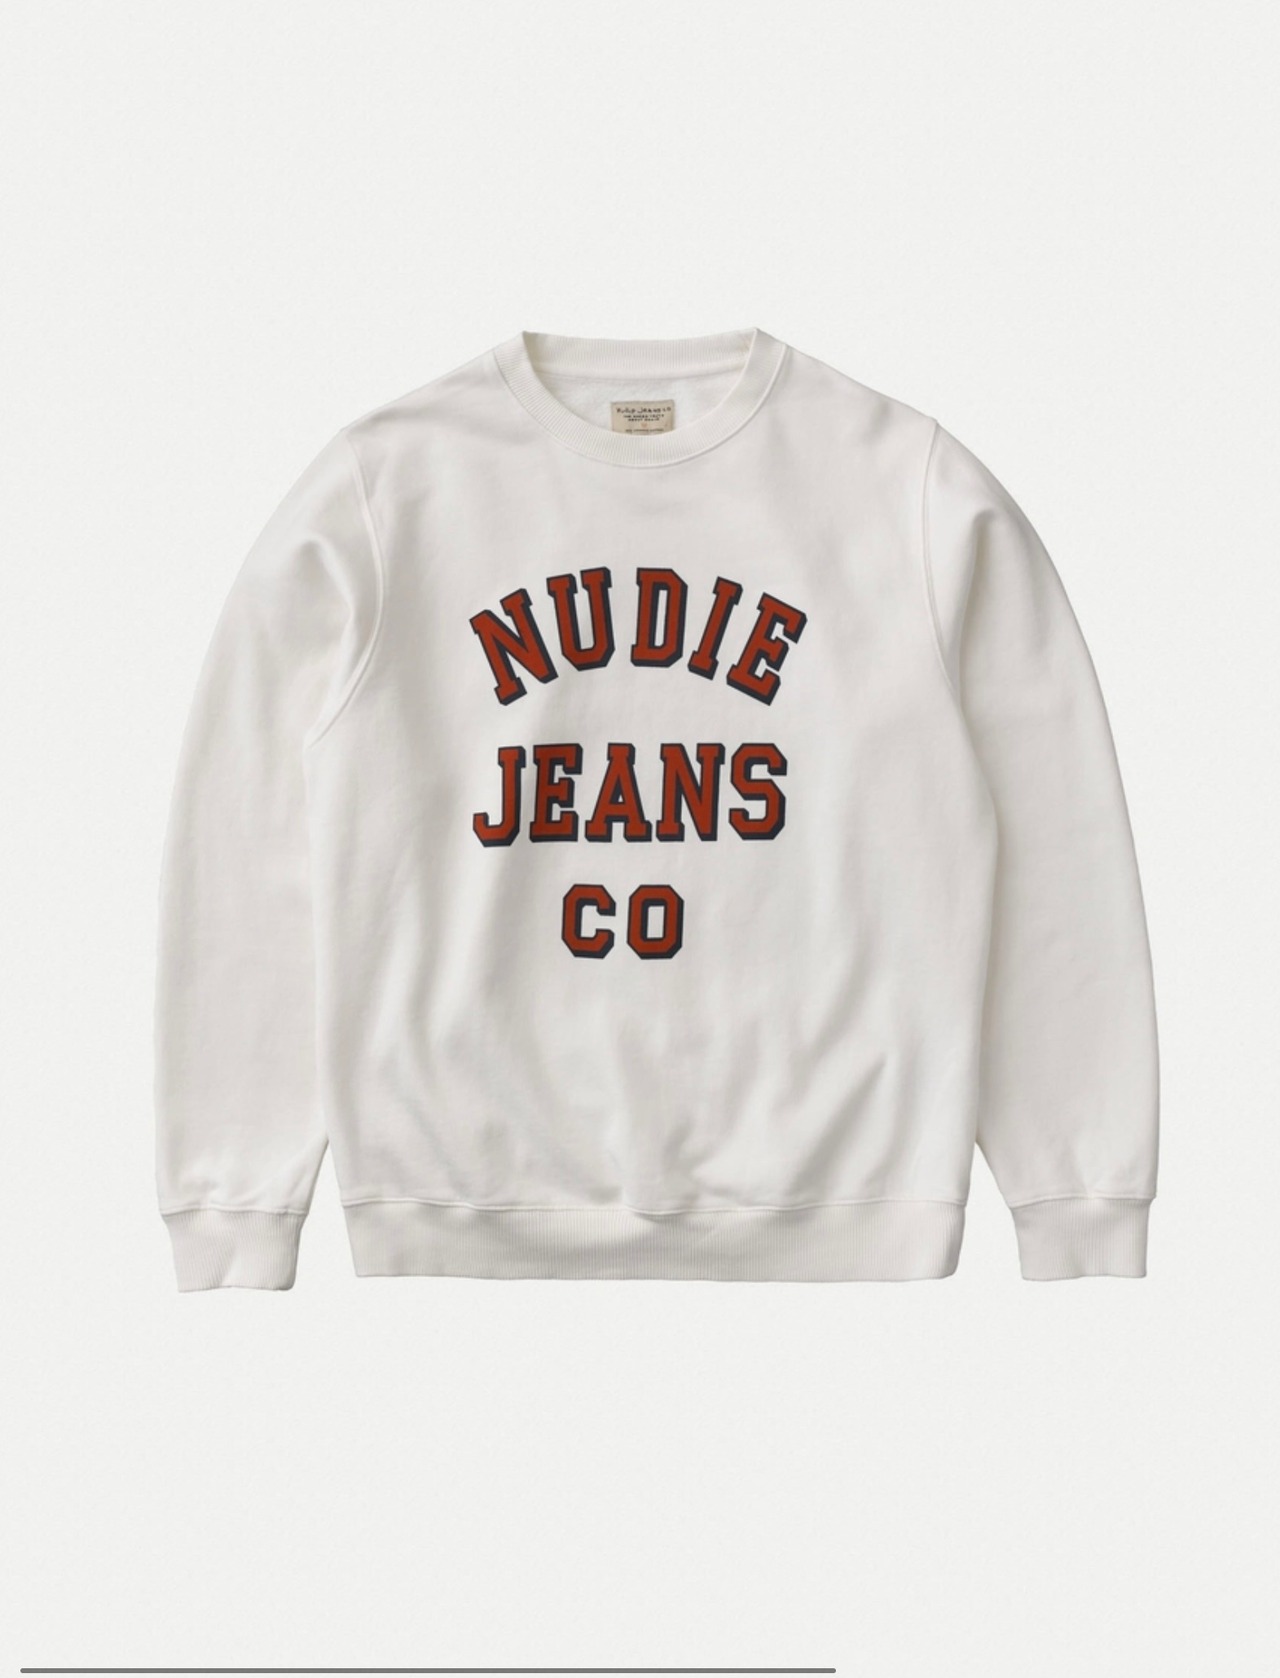 Nudie jeans ヌーディージーンズ  2021 Winter collection Lasse Nudie jeans CO Chalk White スウェット